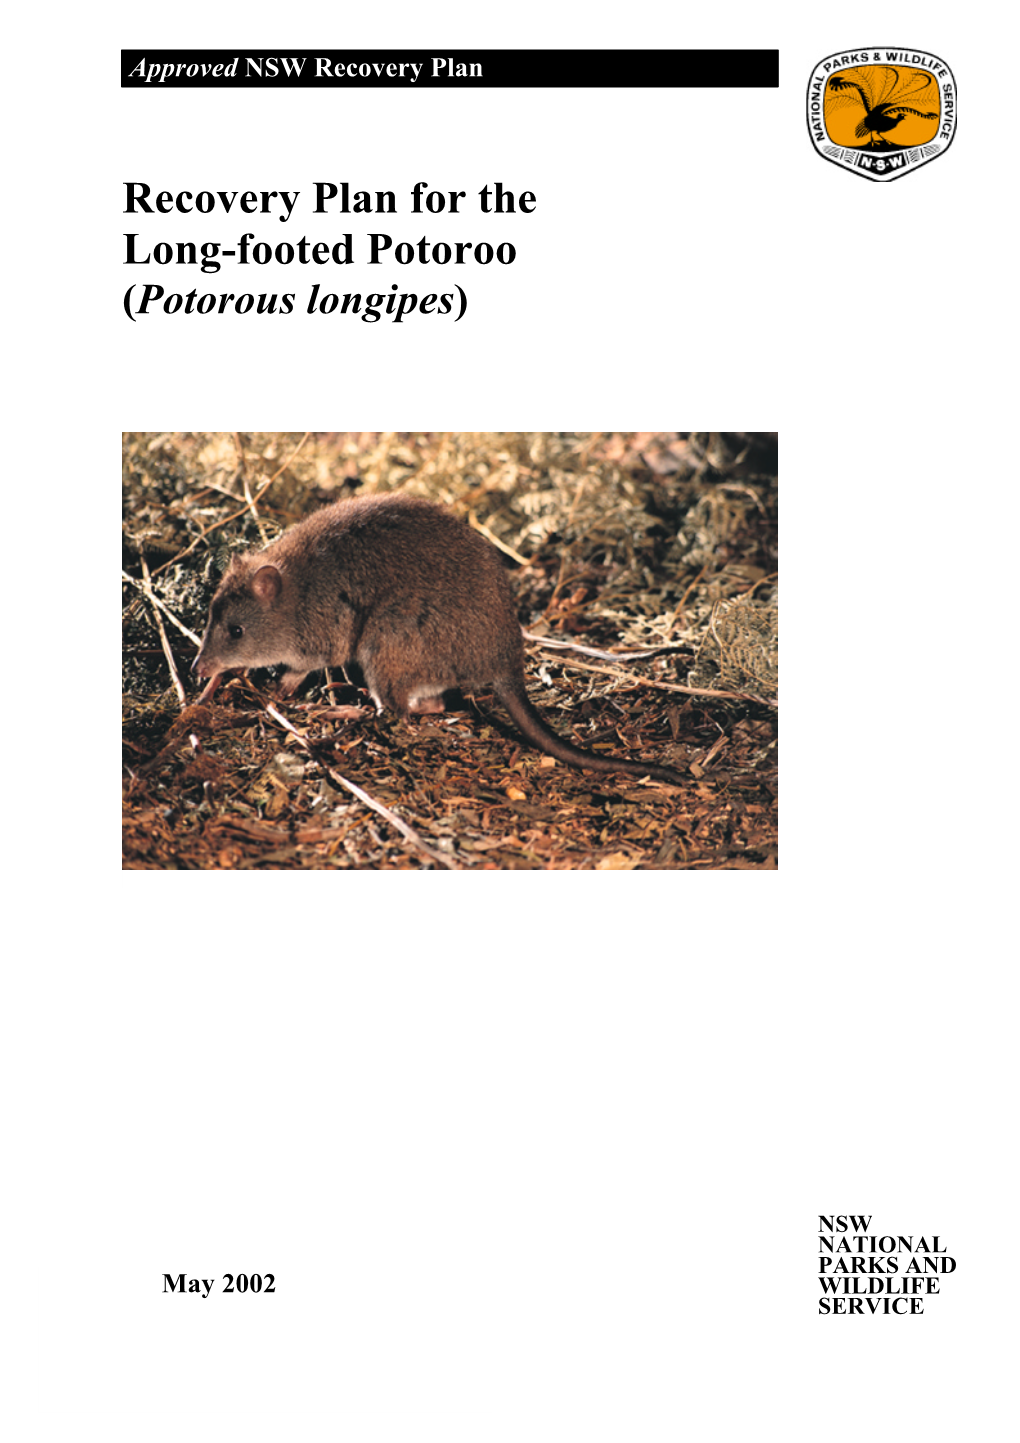 Recovery Plan for the Long-Footed Potoroo (Potorous Longipes)